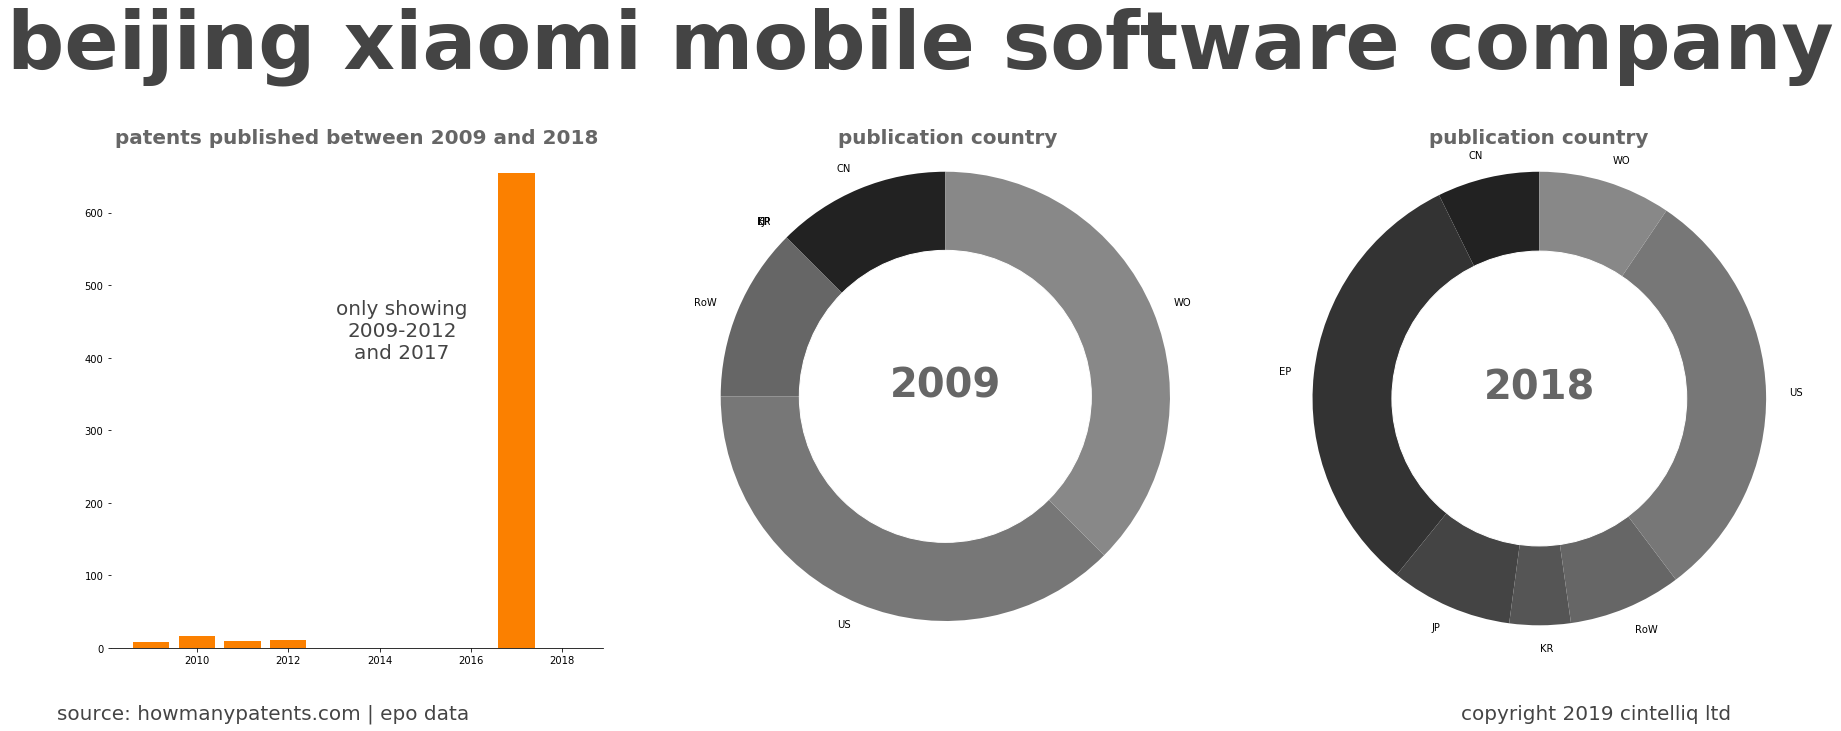 summary of patents for Beijing Xiaomi Mobile Software Company